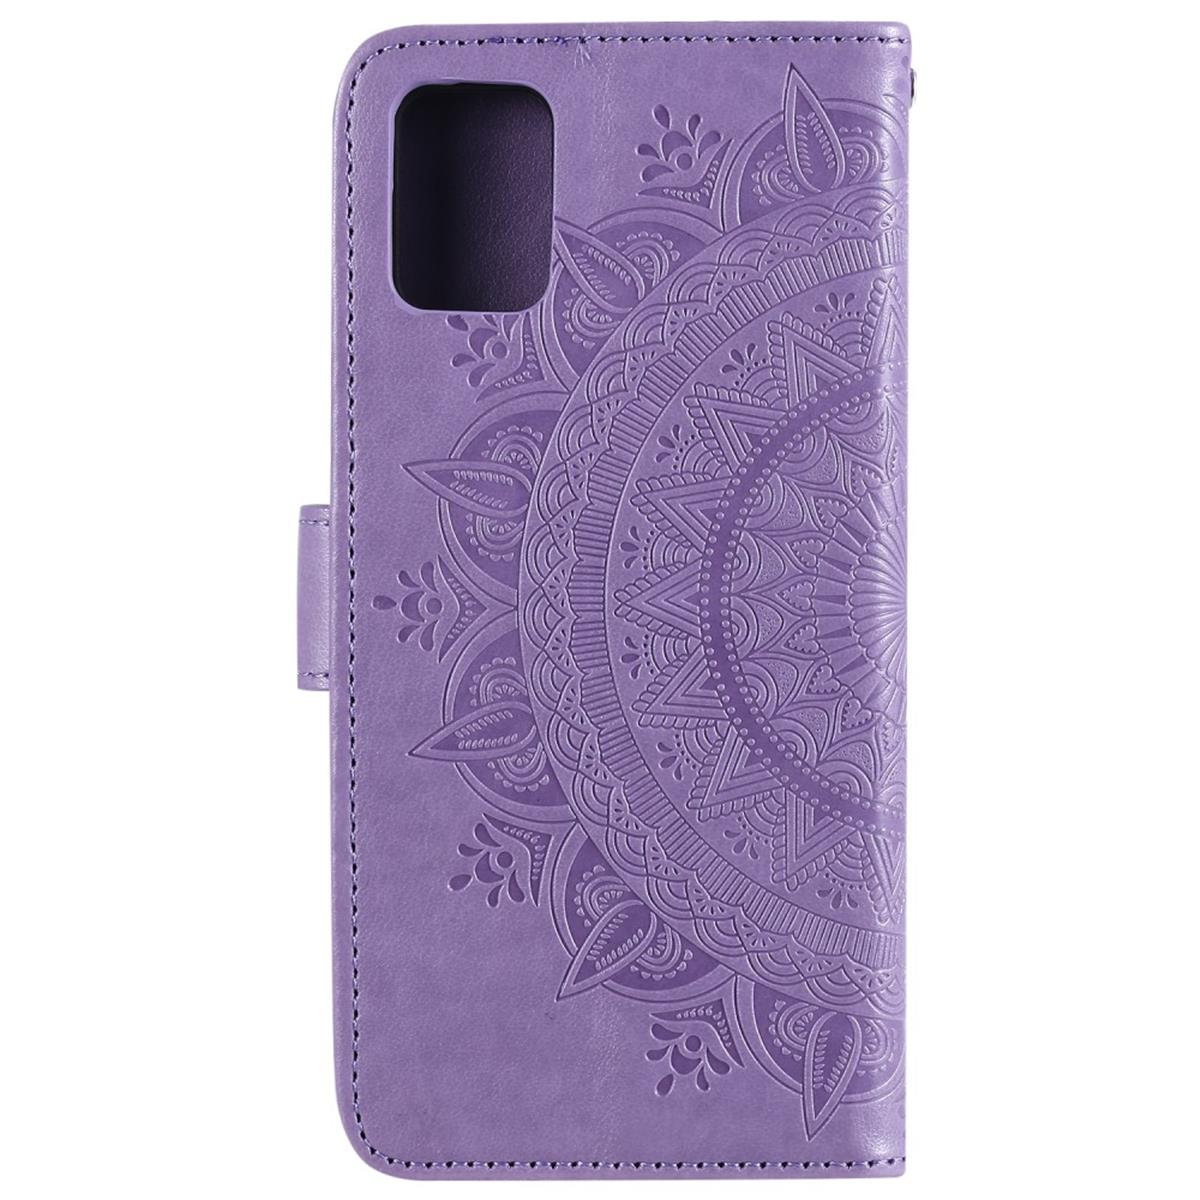 COVERKINGZ Klapphülle Note20, Galaxy Muster, Samsung, mit Lila Mandala Bookcover